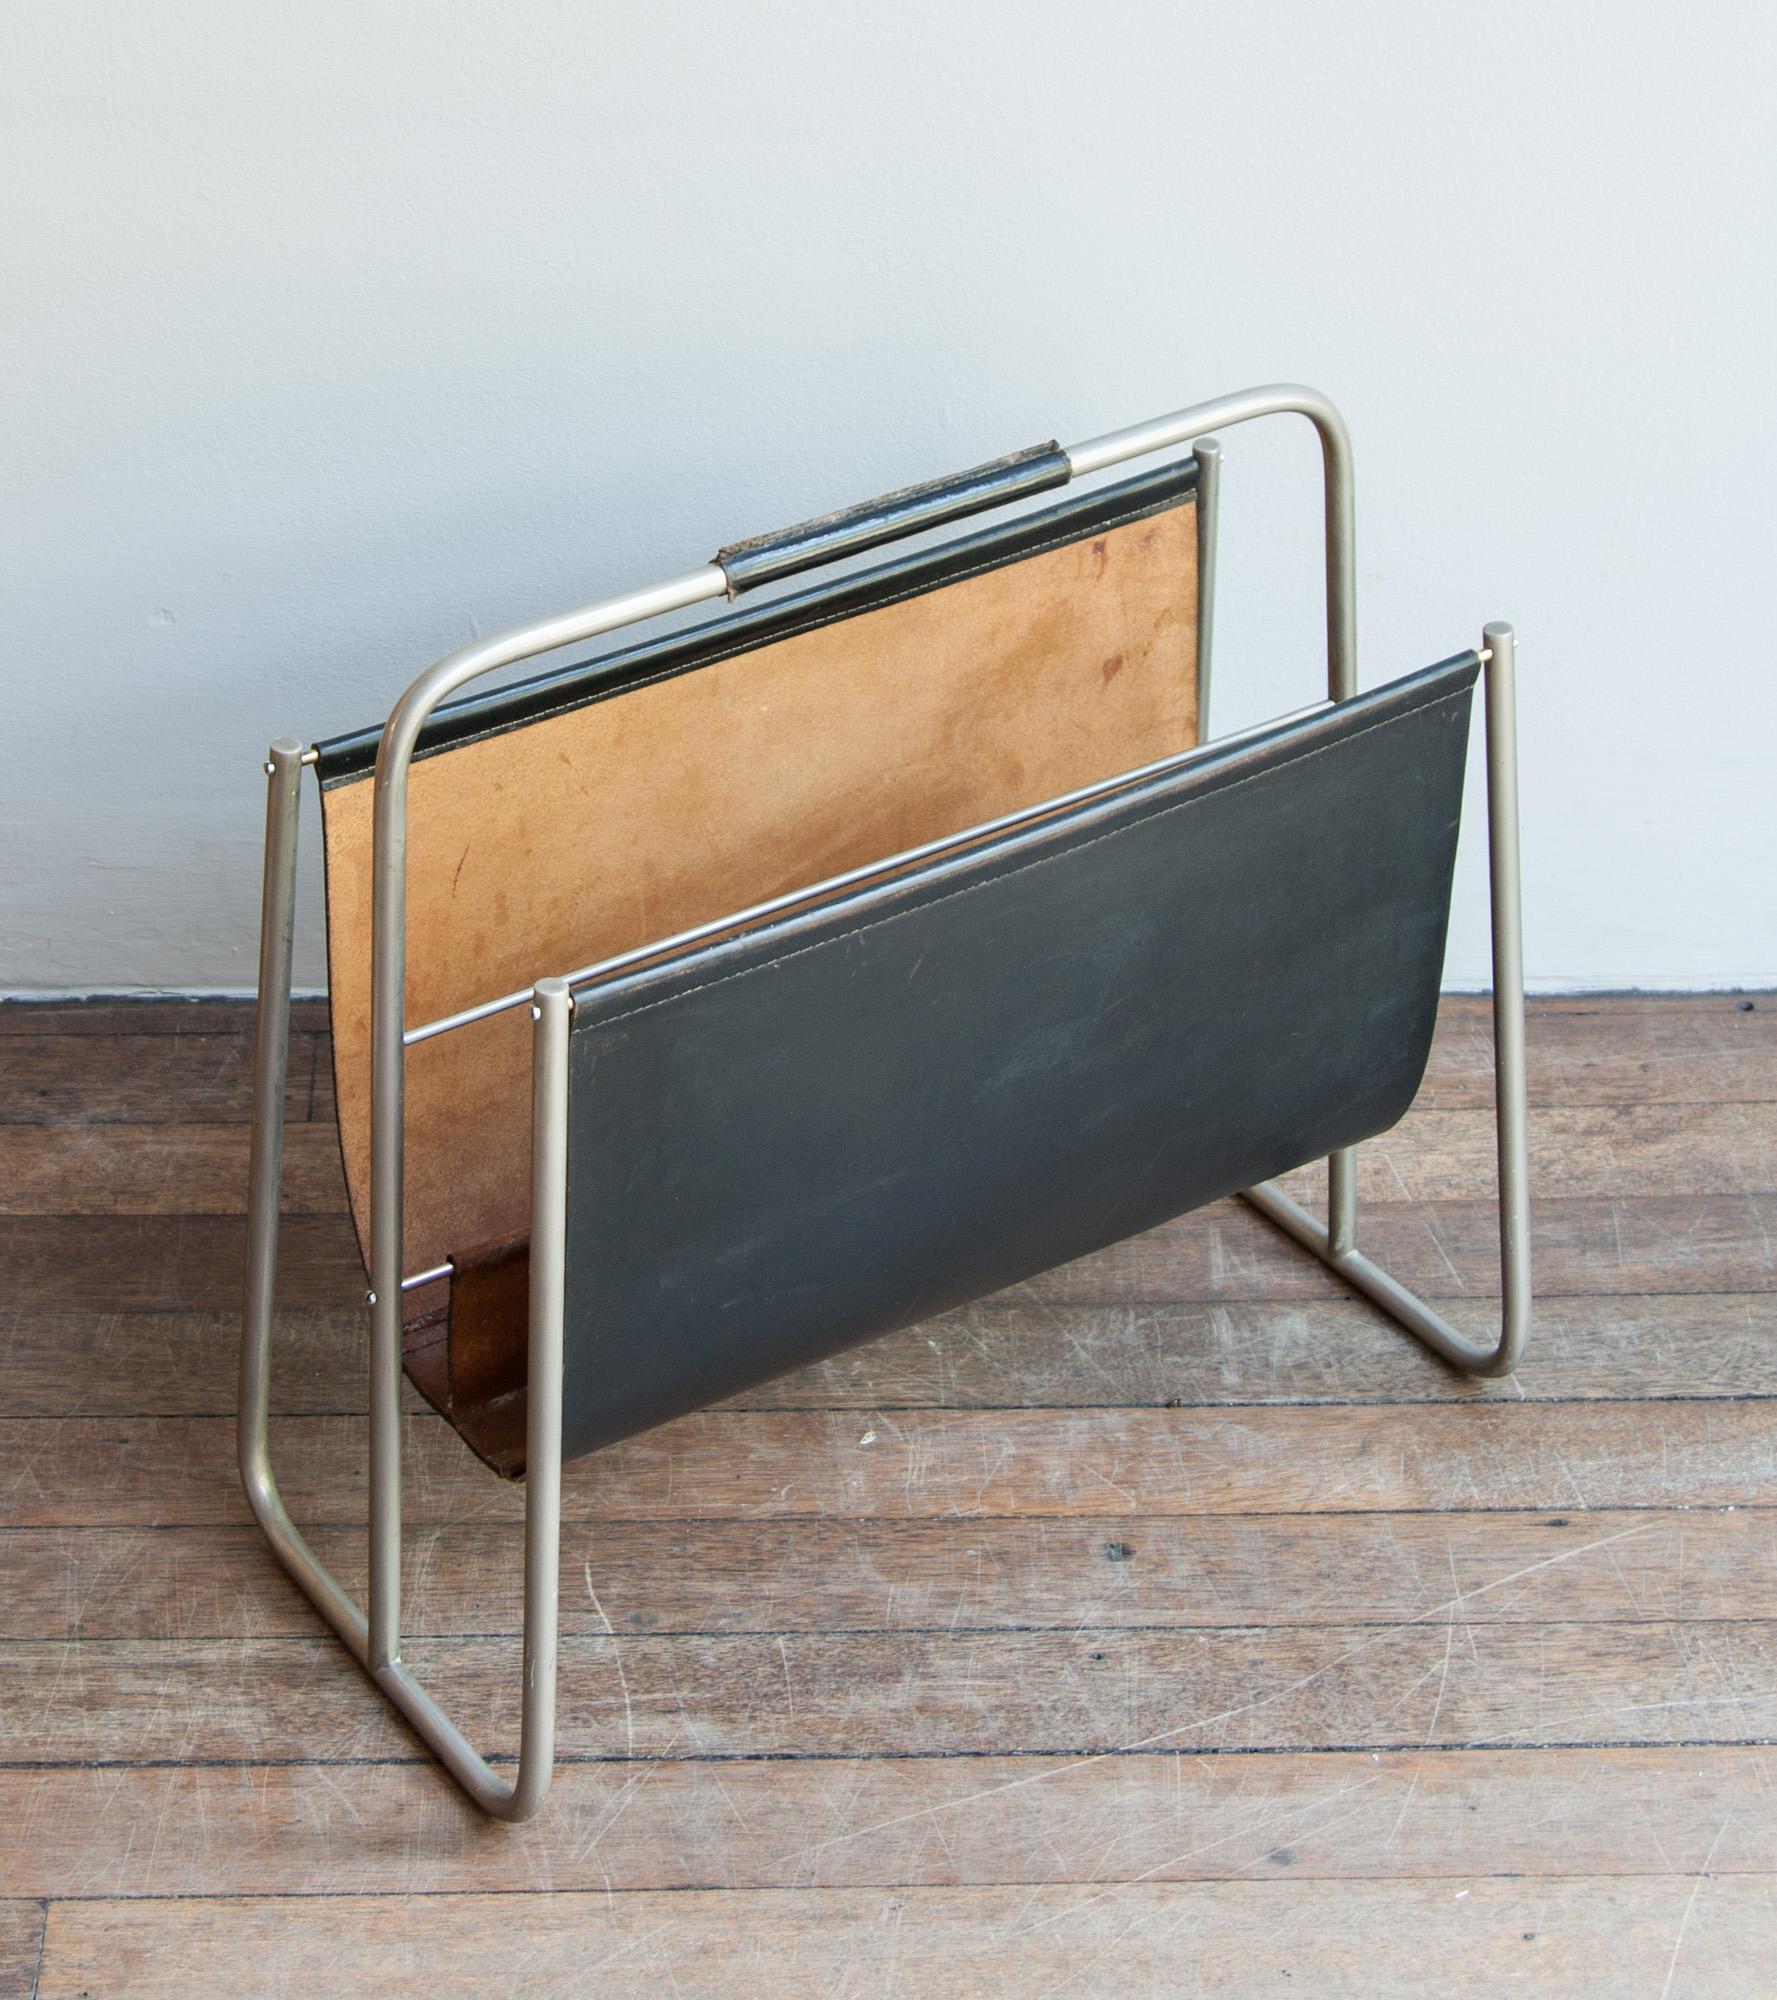 Vintage magazine rack by Carl Auböck II, Vienna, circa 1950.
The sling and the handle are made of black-colored leather and have stitching of the same color; the frame is made of matte nickel-plated brass and is covered by a uniform natural